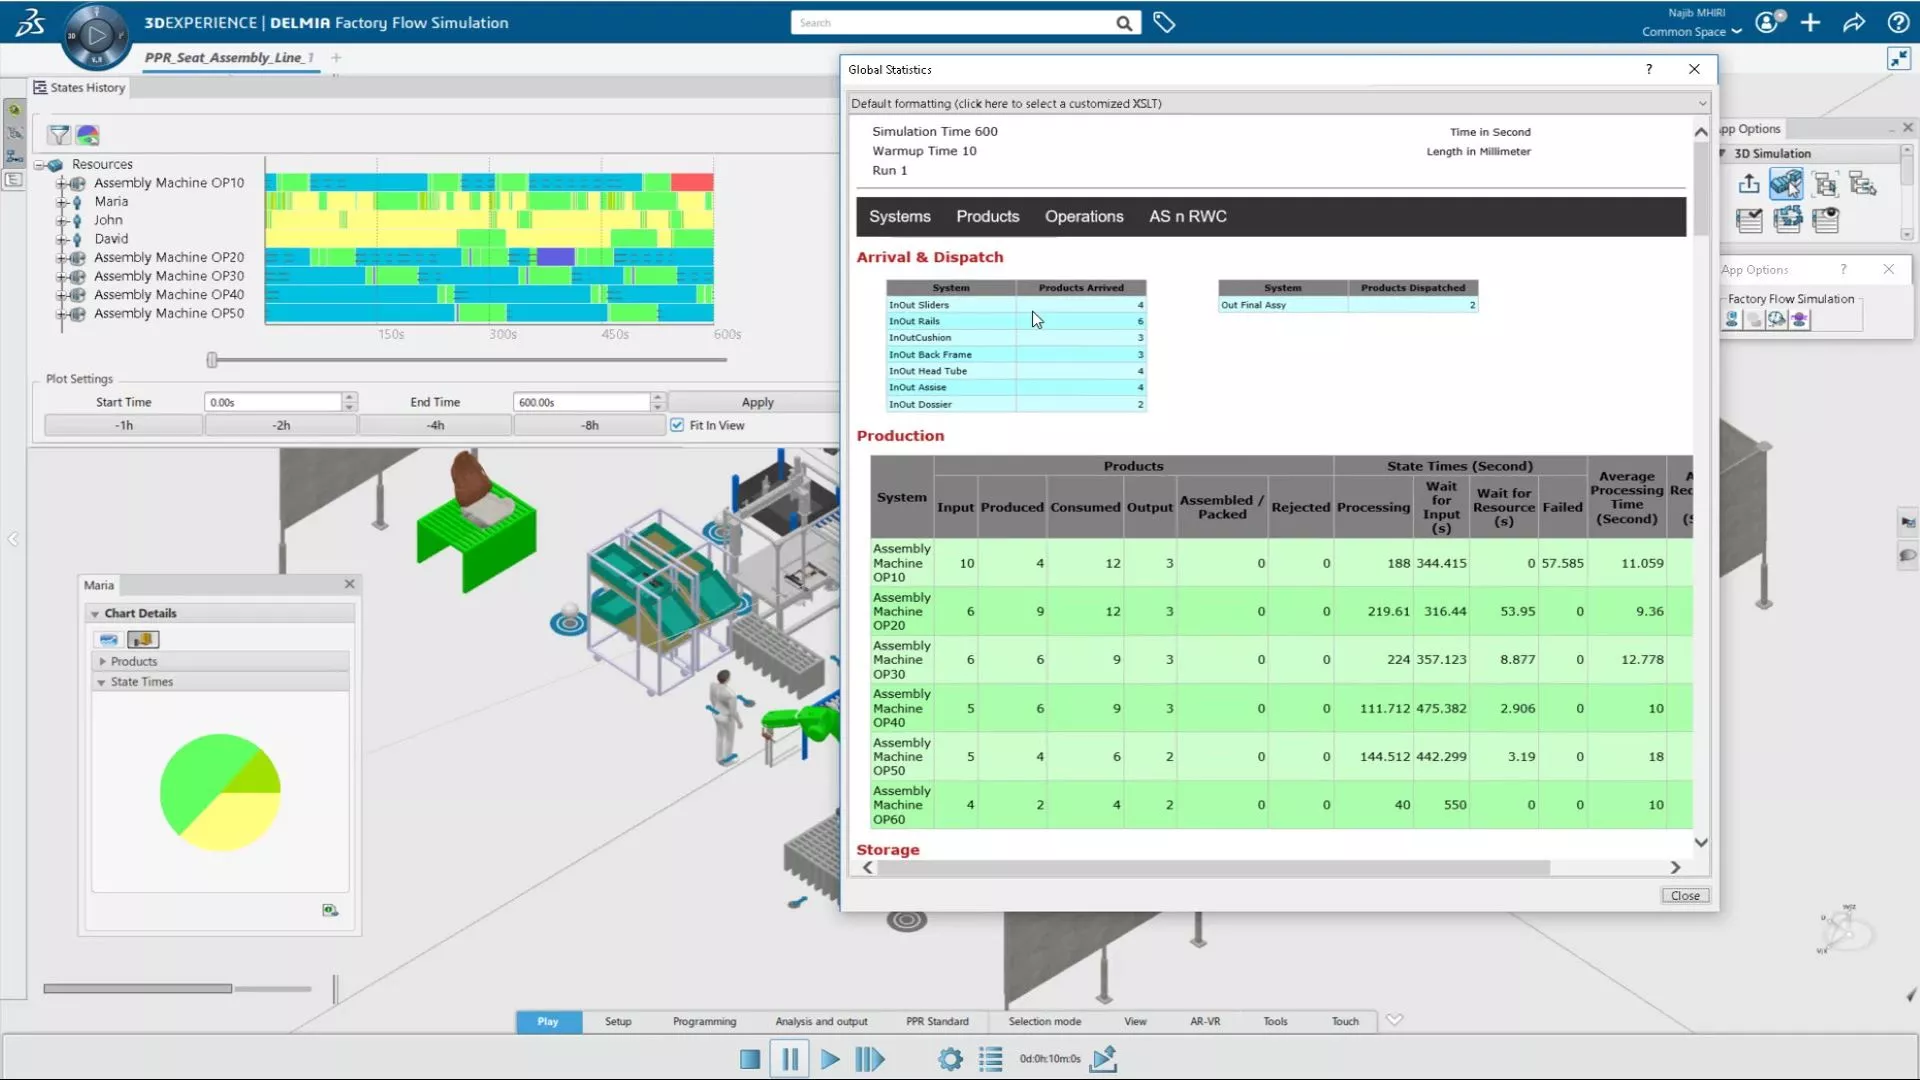 3DEXPERIENCE VIRTUAL FACTORY simulations provide the data you need to make informed choices.